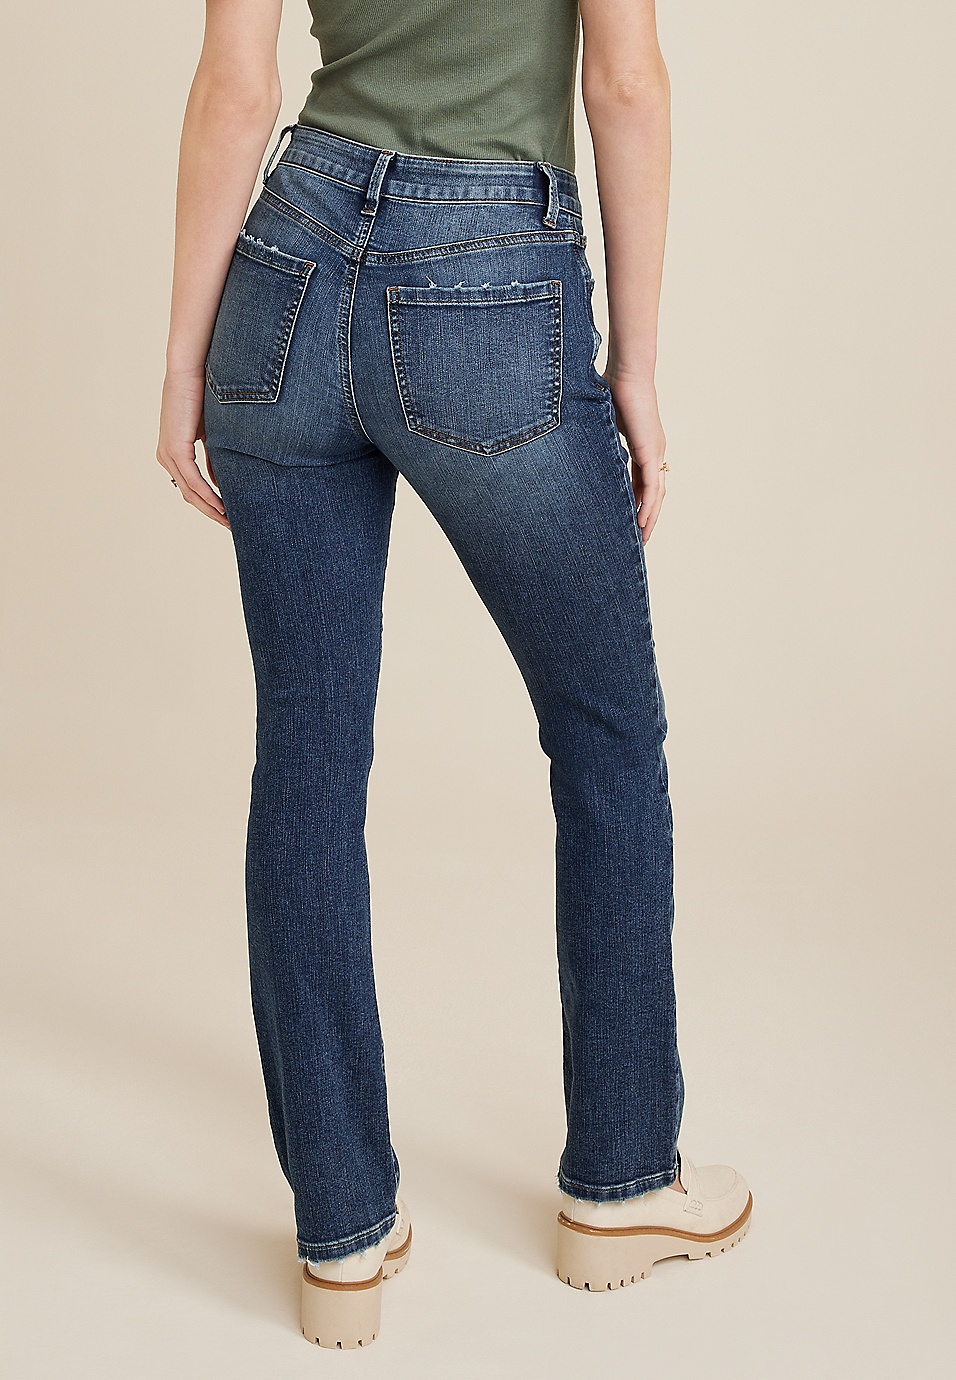 m jeans by maurices™ Everflex™ High Rise Curvy Slim Boot Jean